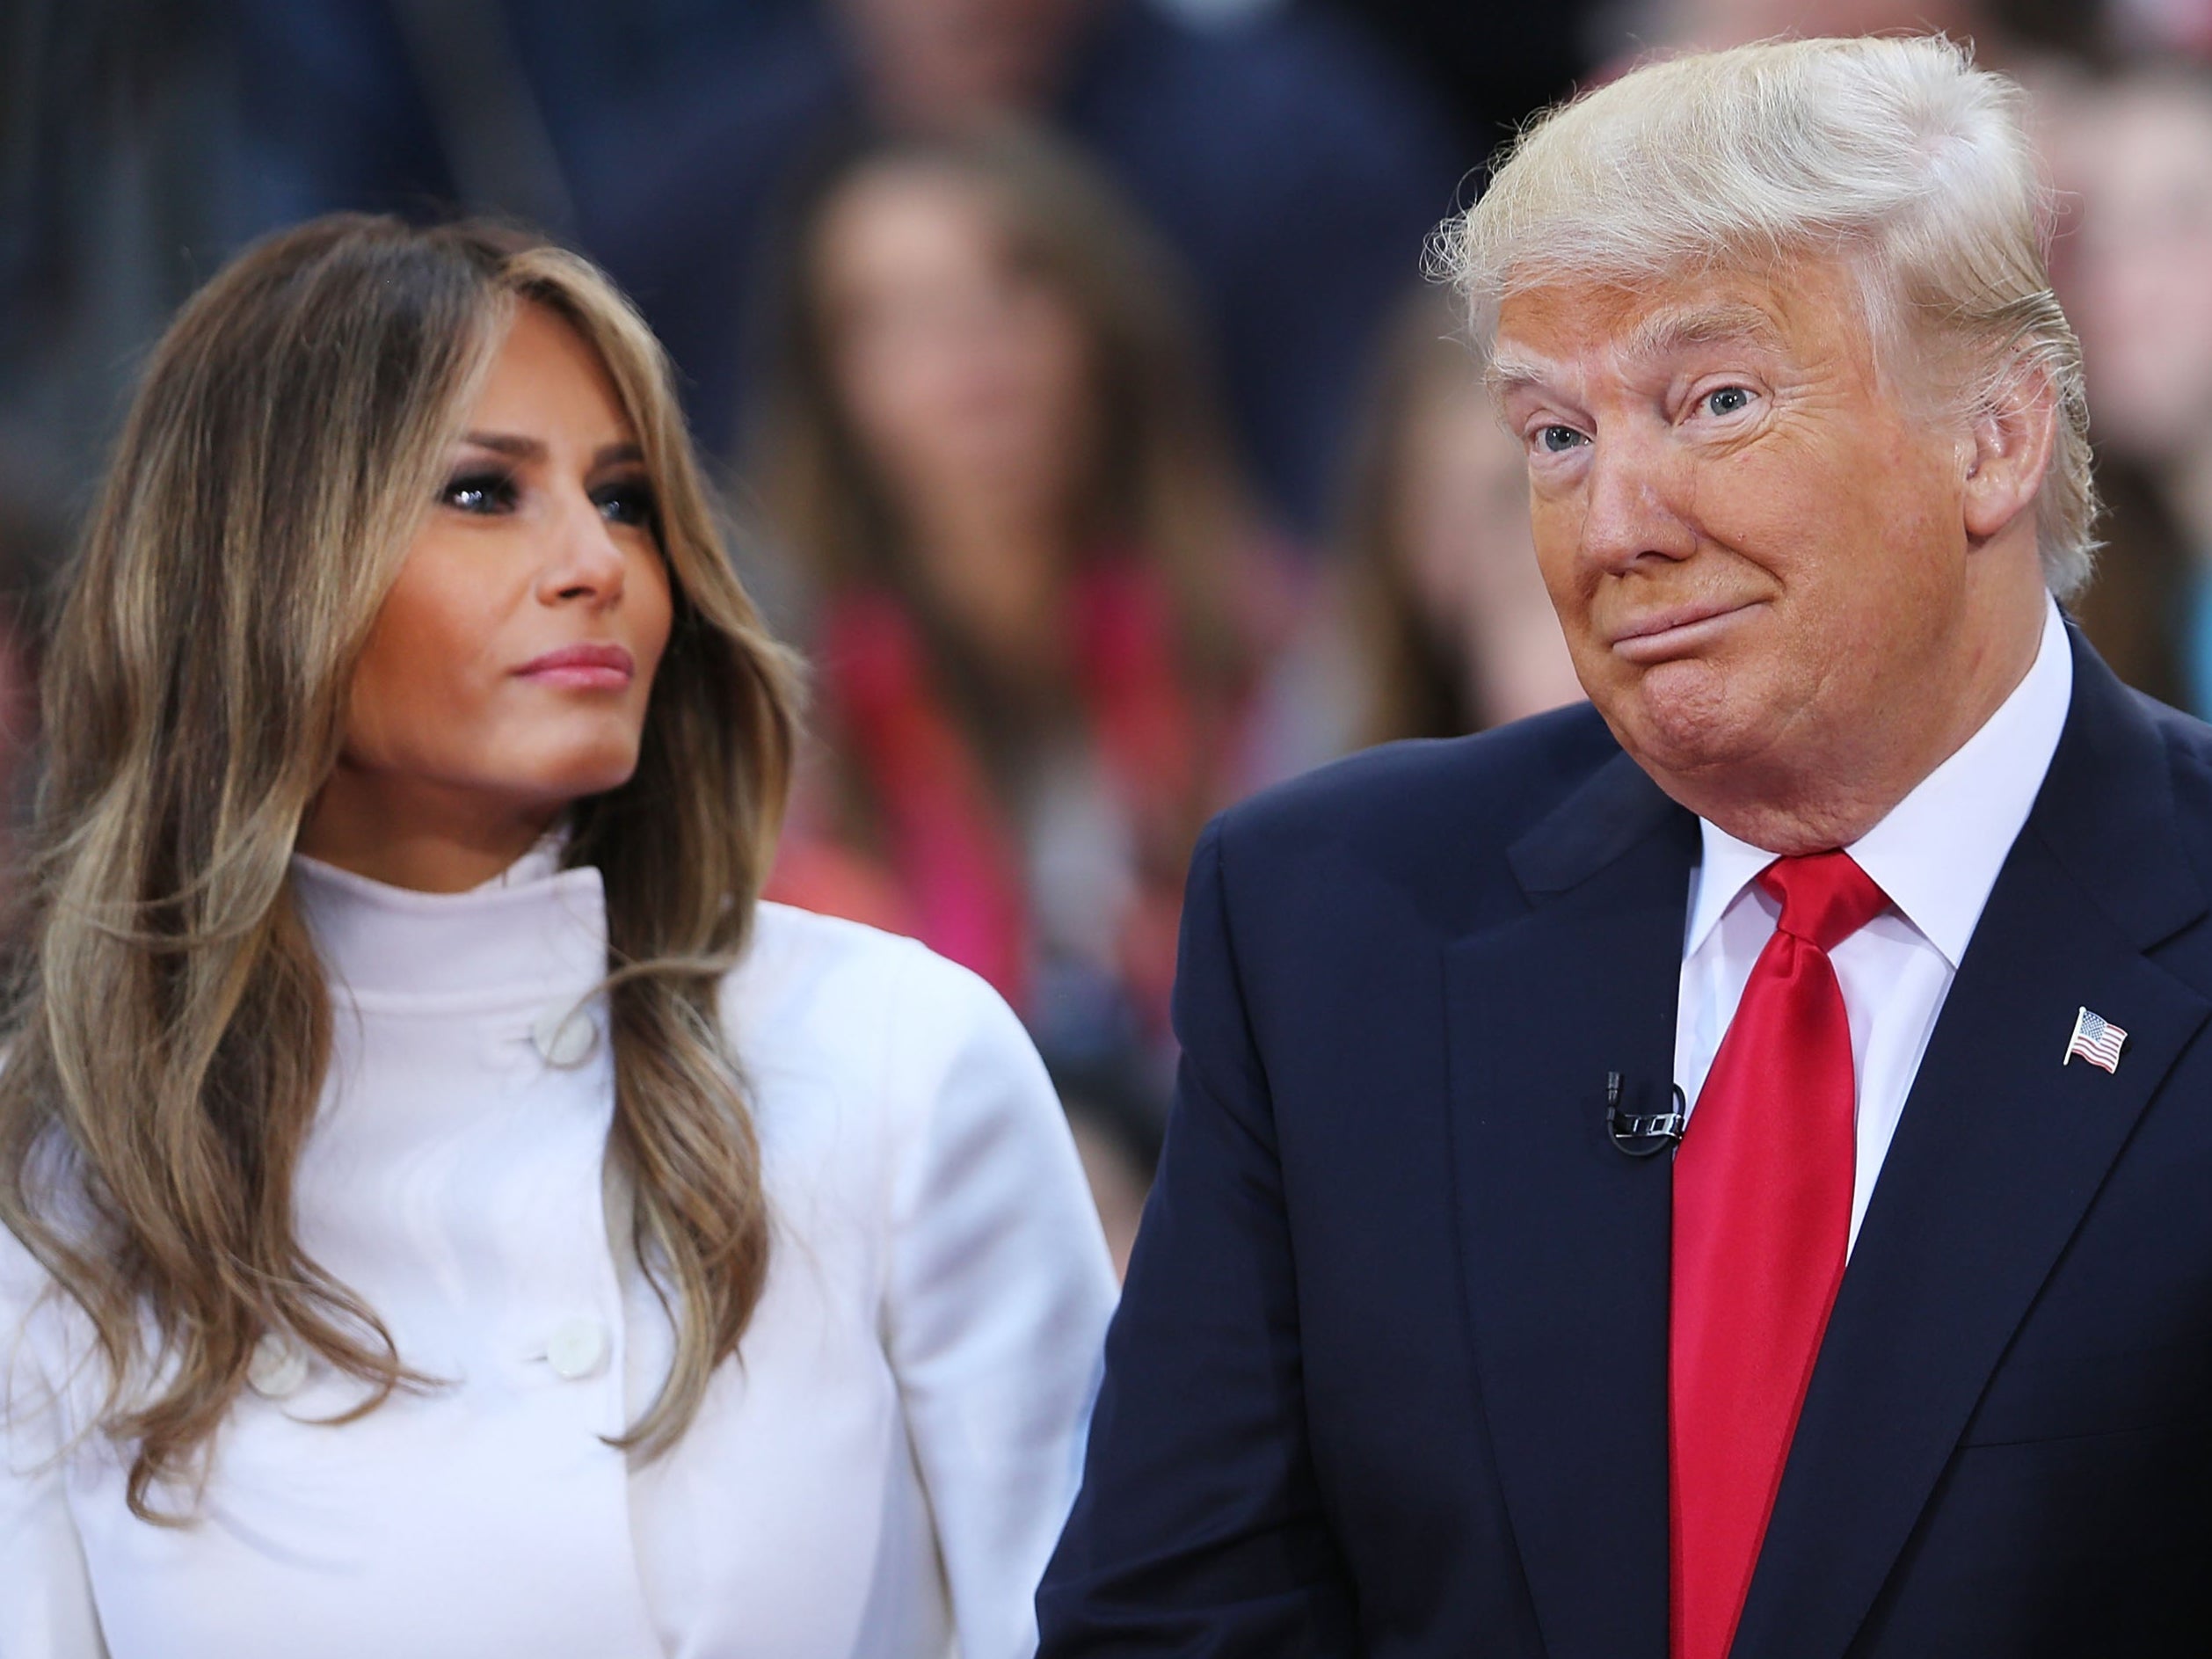 What President Trump and Melania may experience with Covid-19